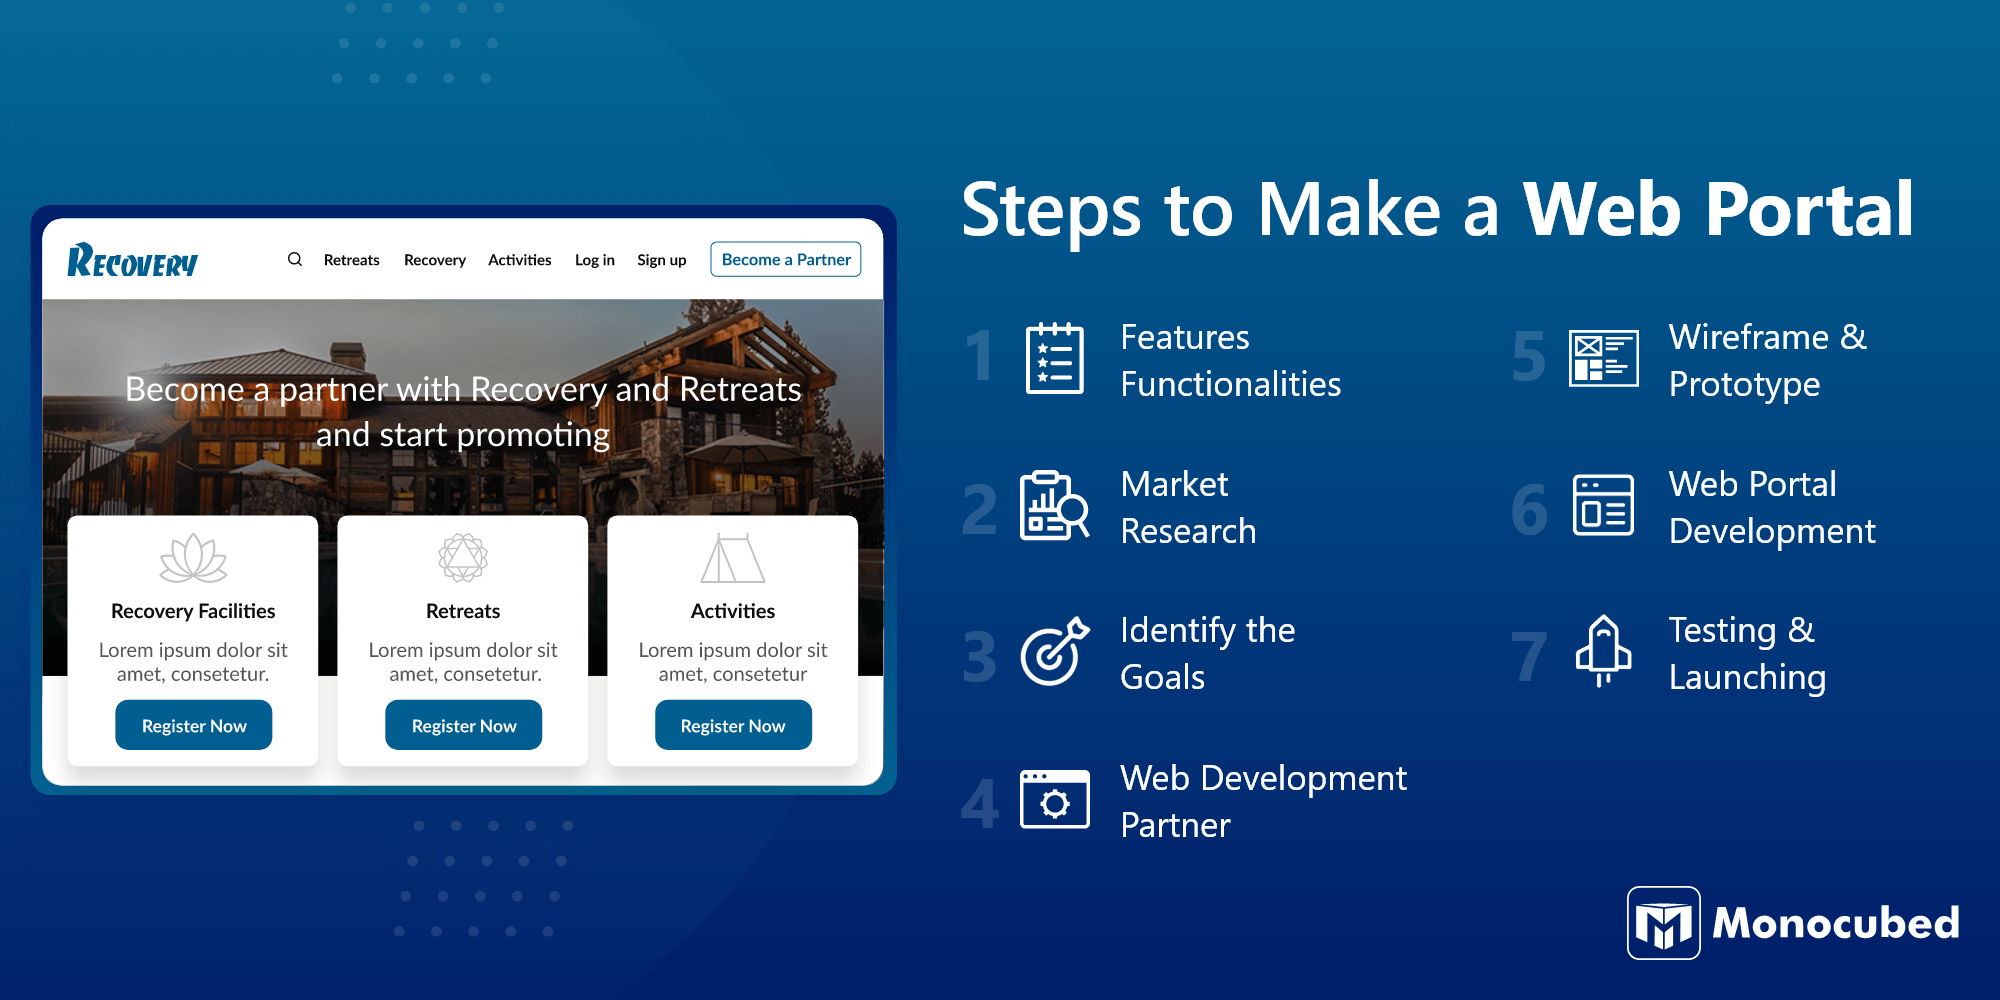 Creating An Fidelity Account: Step-By-Step Guide - Login